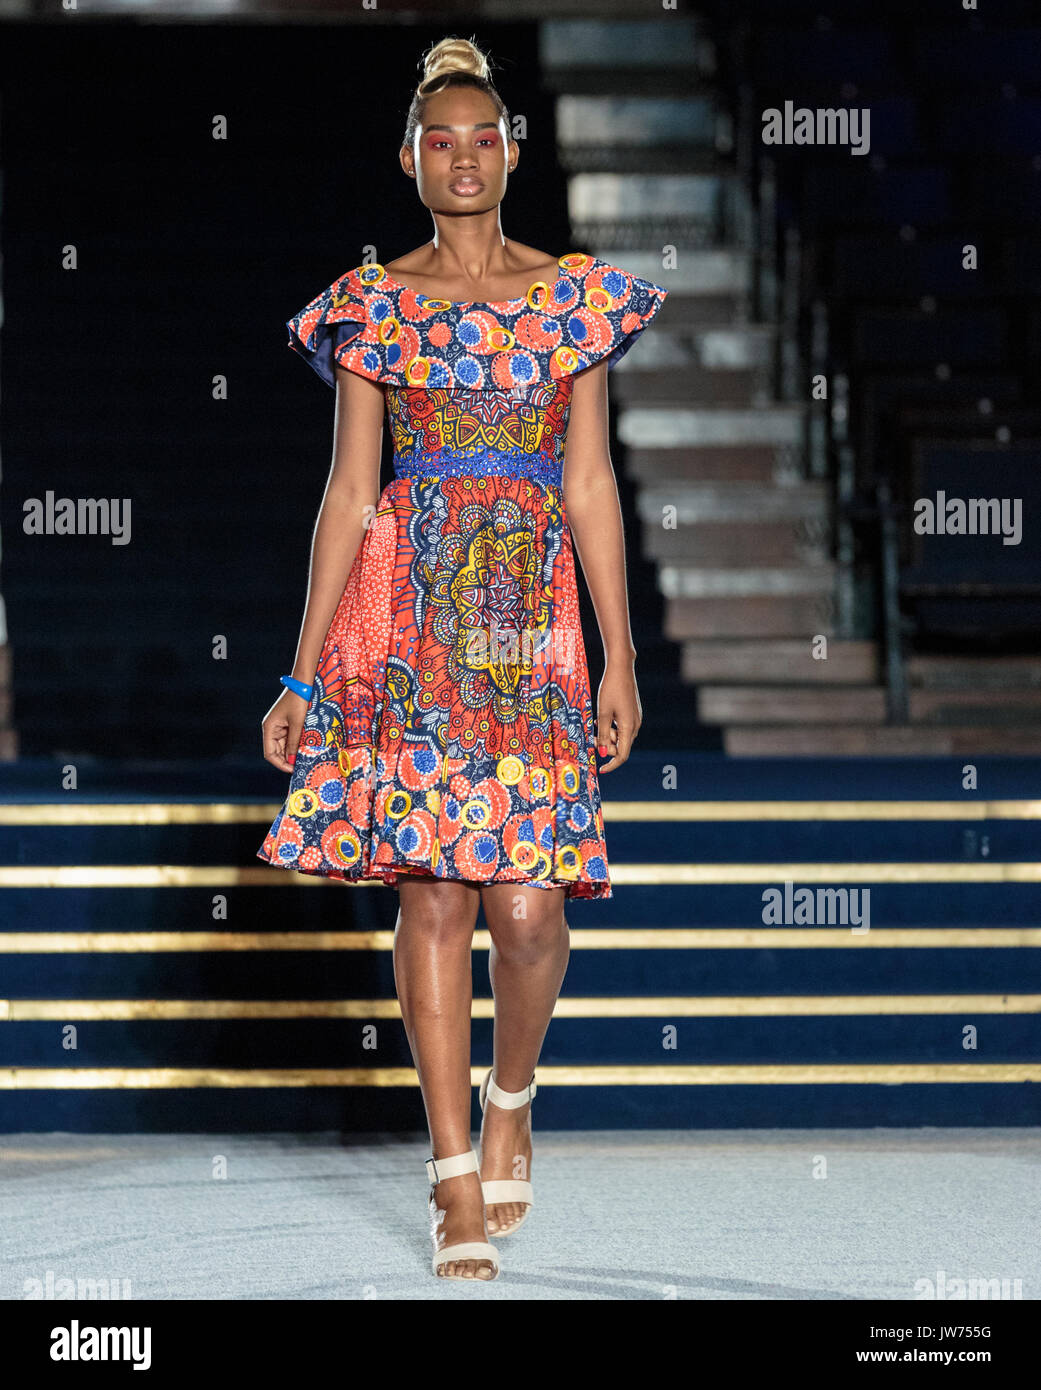 London, UK, 11th August 2017. The Bijelly designs are presented. Models on the second runway of the day, with designs by Godwin Green, Araewa, Bijelly, Regallia, Maufechi, Monami 4 Moremi, Kola Kuddus. Since debuting in 2011, the two day Africa Fashion Week London, AFWL, has grown into one of the largest Africa inspired fashion events in Europe. Stock Photo